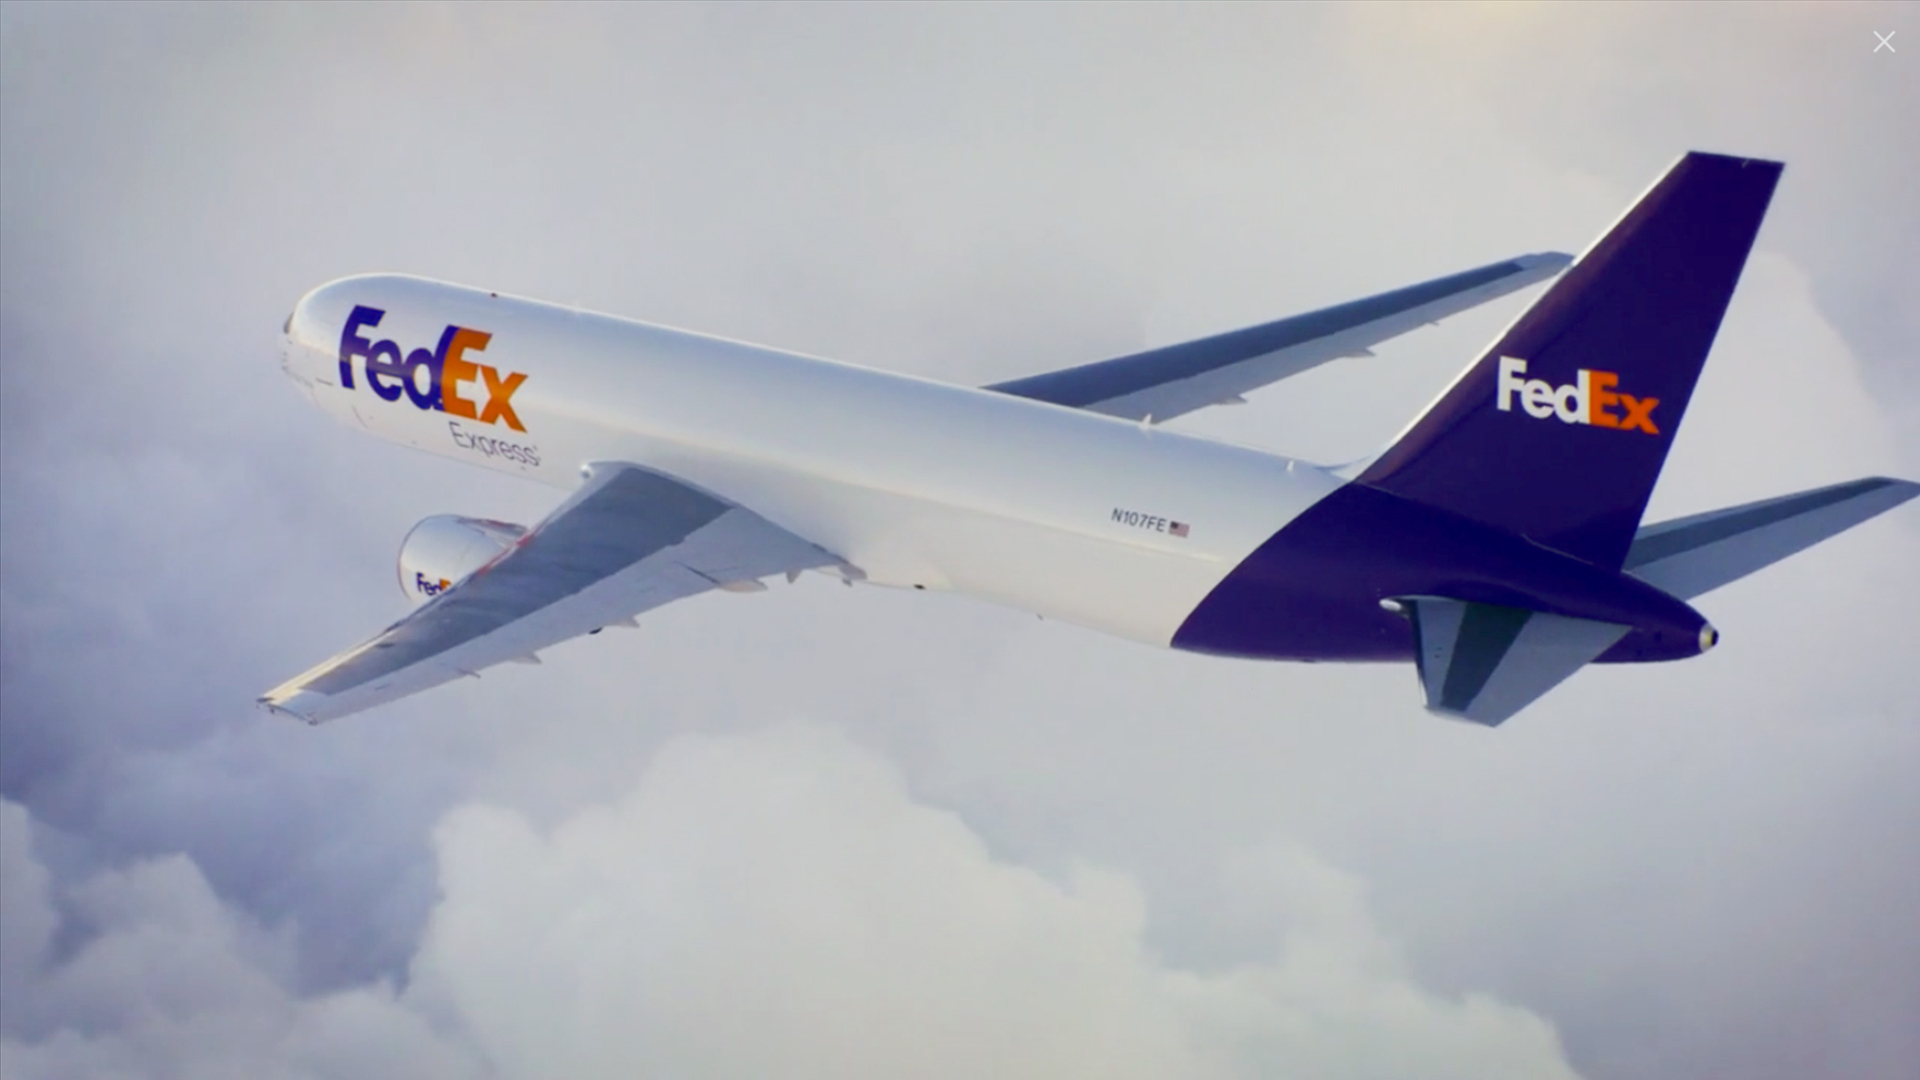 Fedex 1080P 2k 4k HD wallpapers backgrounds free download  Rare Gallery